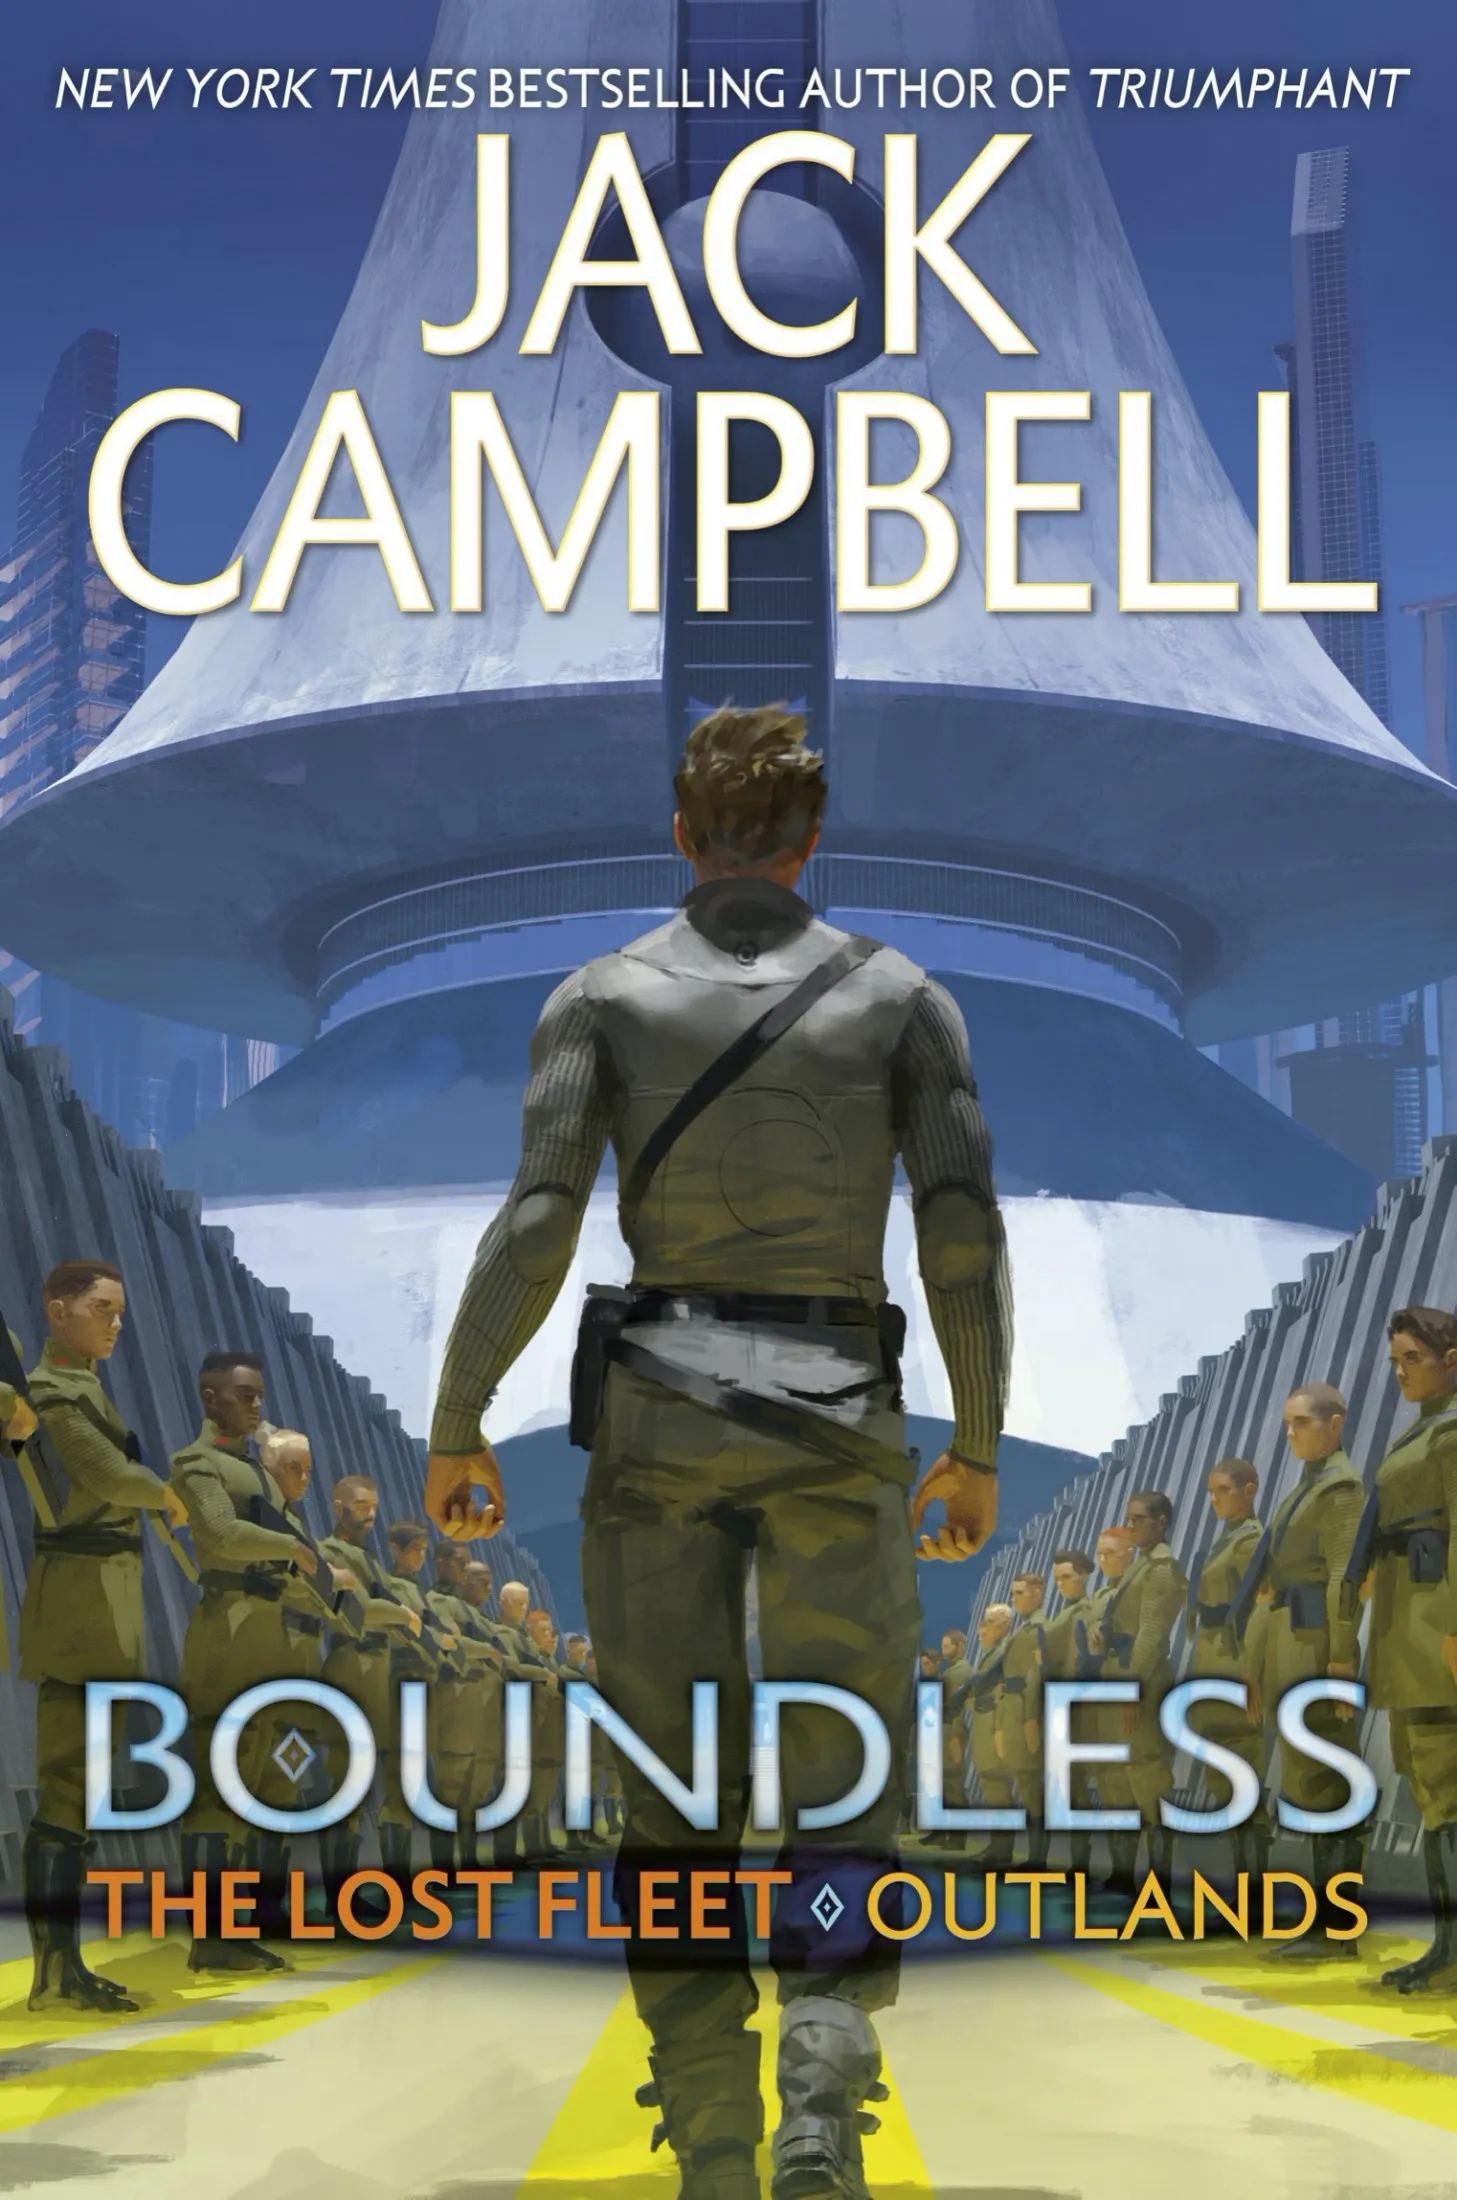 Boundless (The Lost Fleet: Outlands #1)